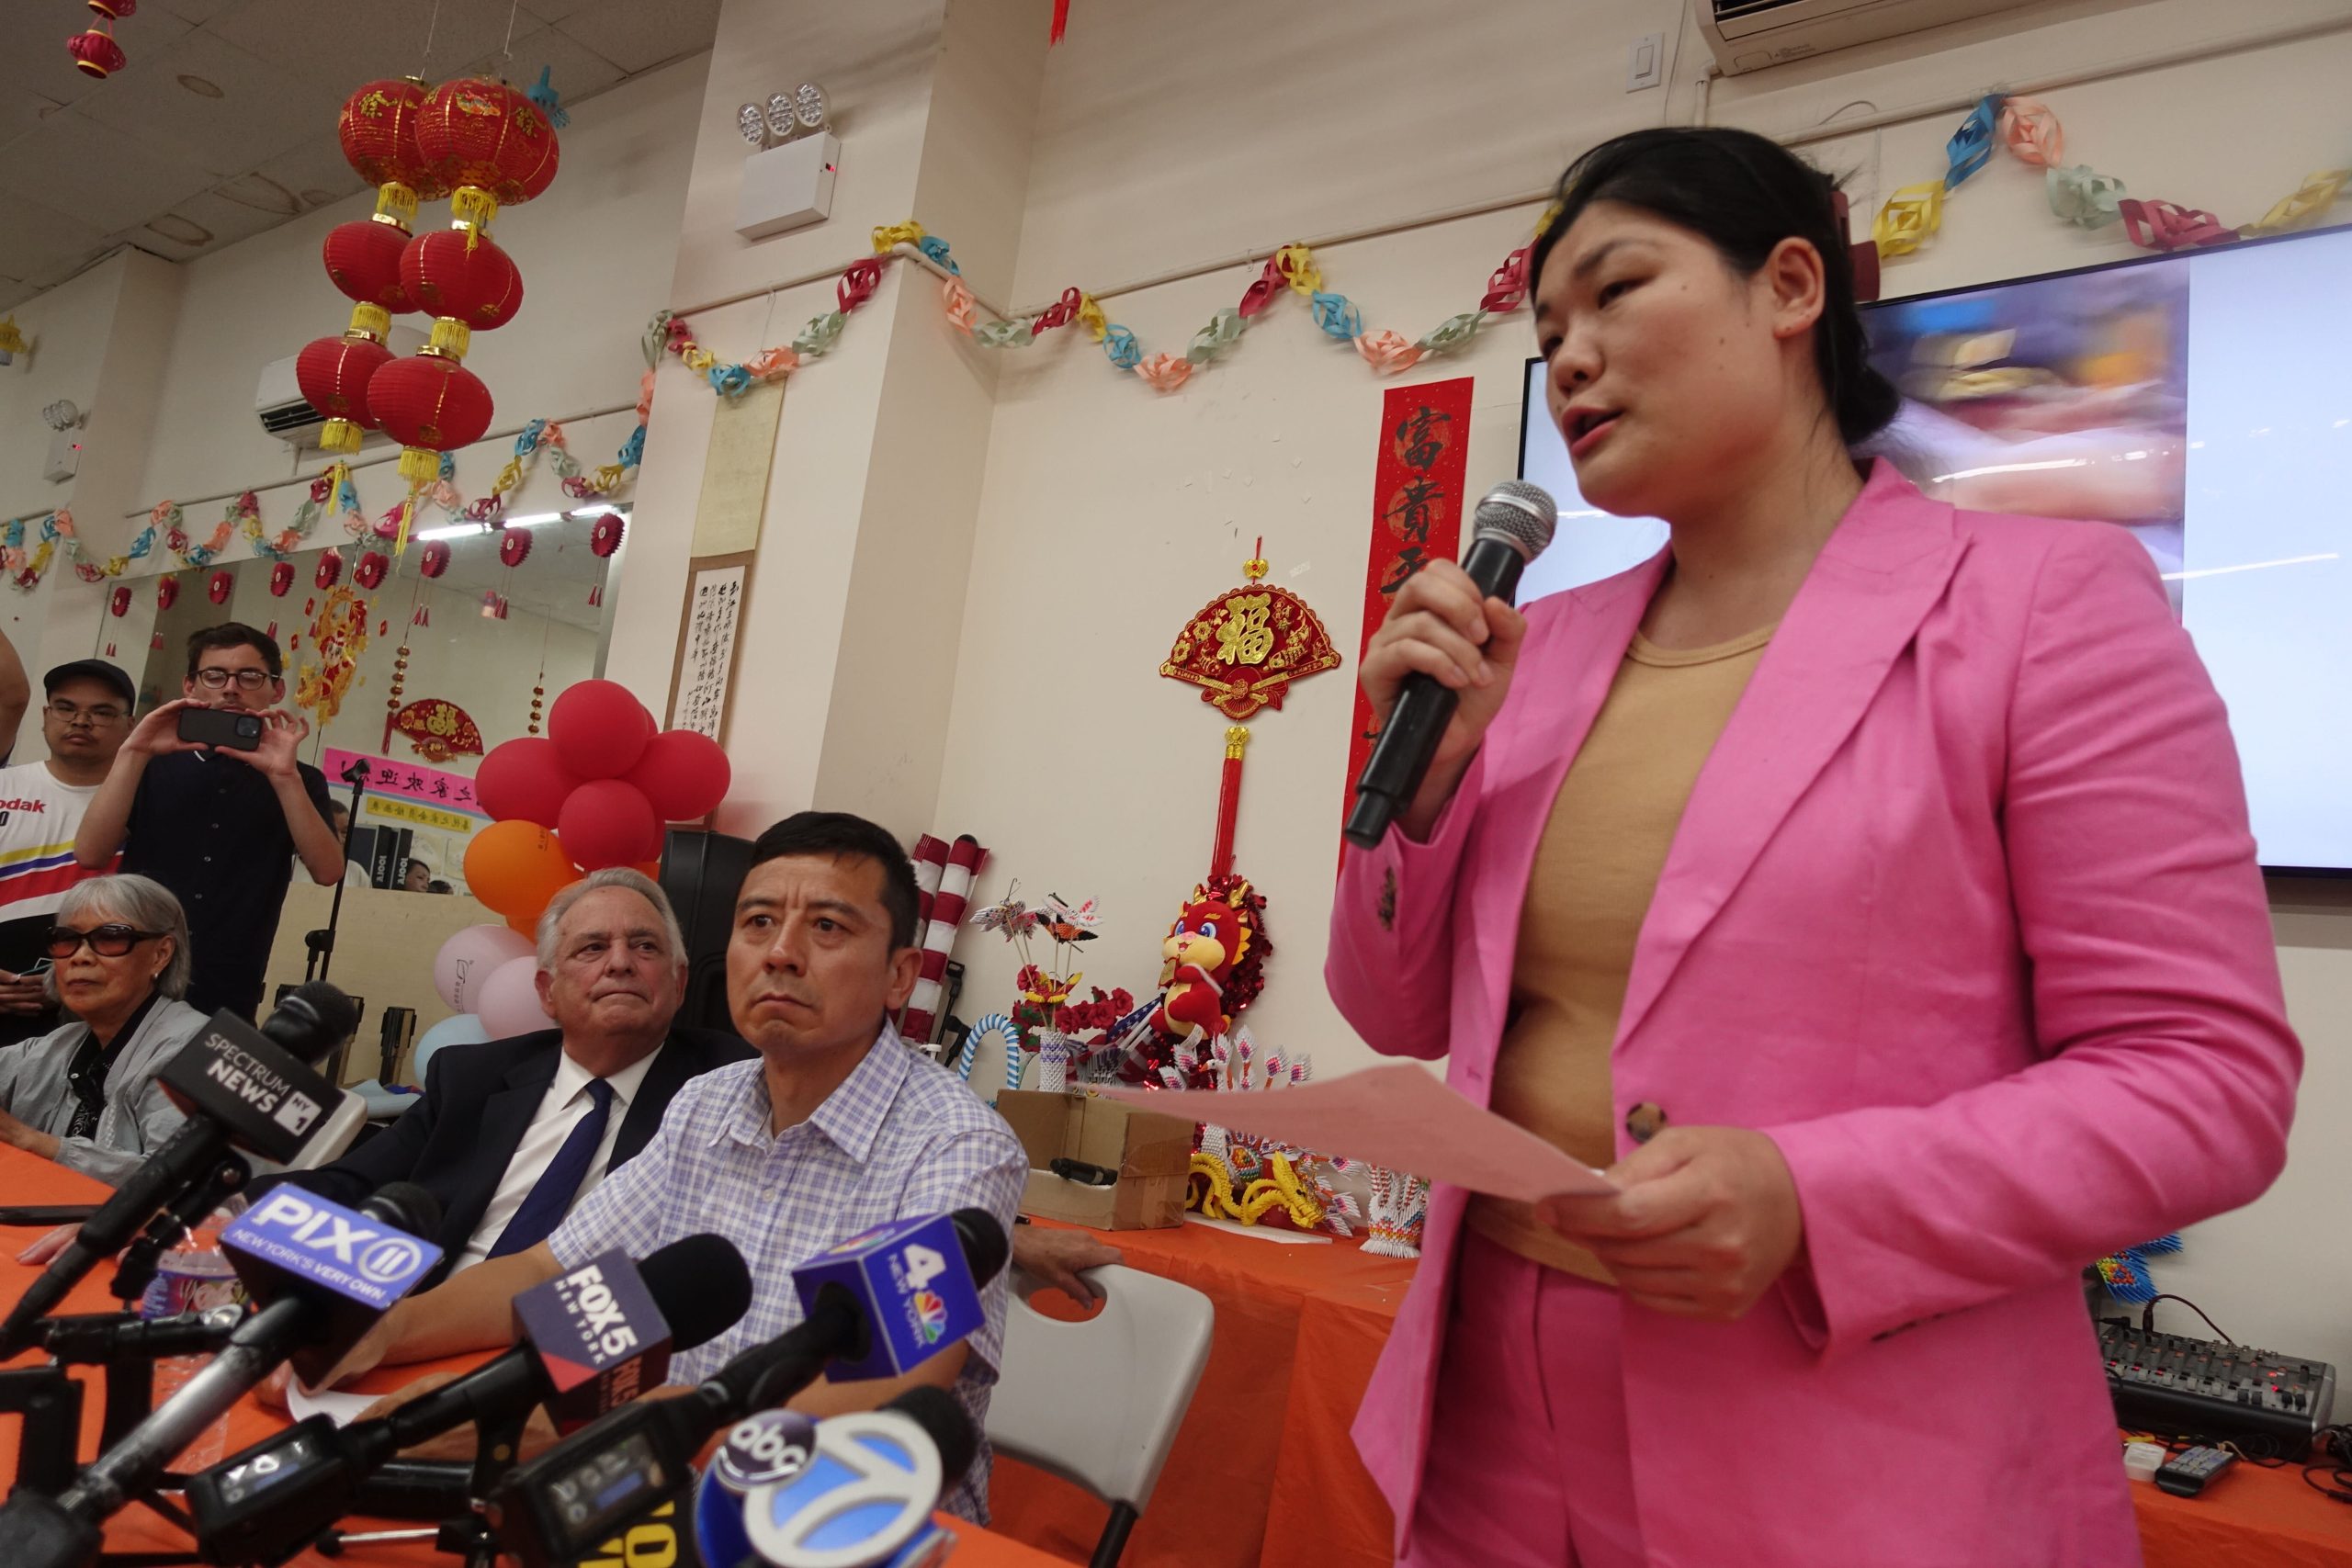 Councilwoman Susan Zhuang stands holding a microphone in a pink suit and tan T-shirt. The left side of the image shows network news microphones and community attendees.